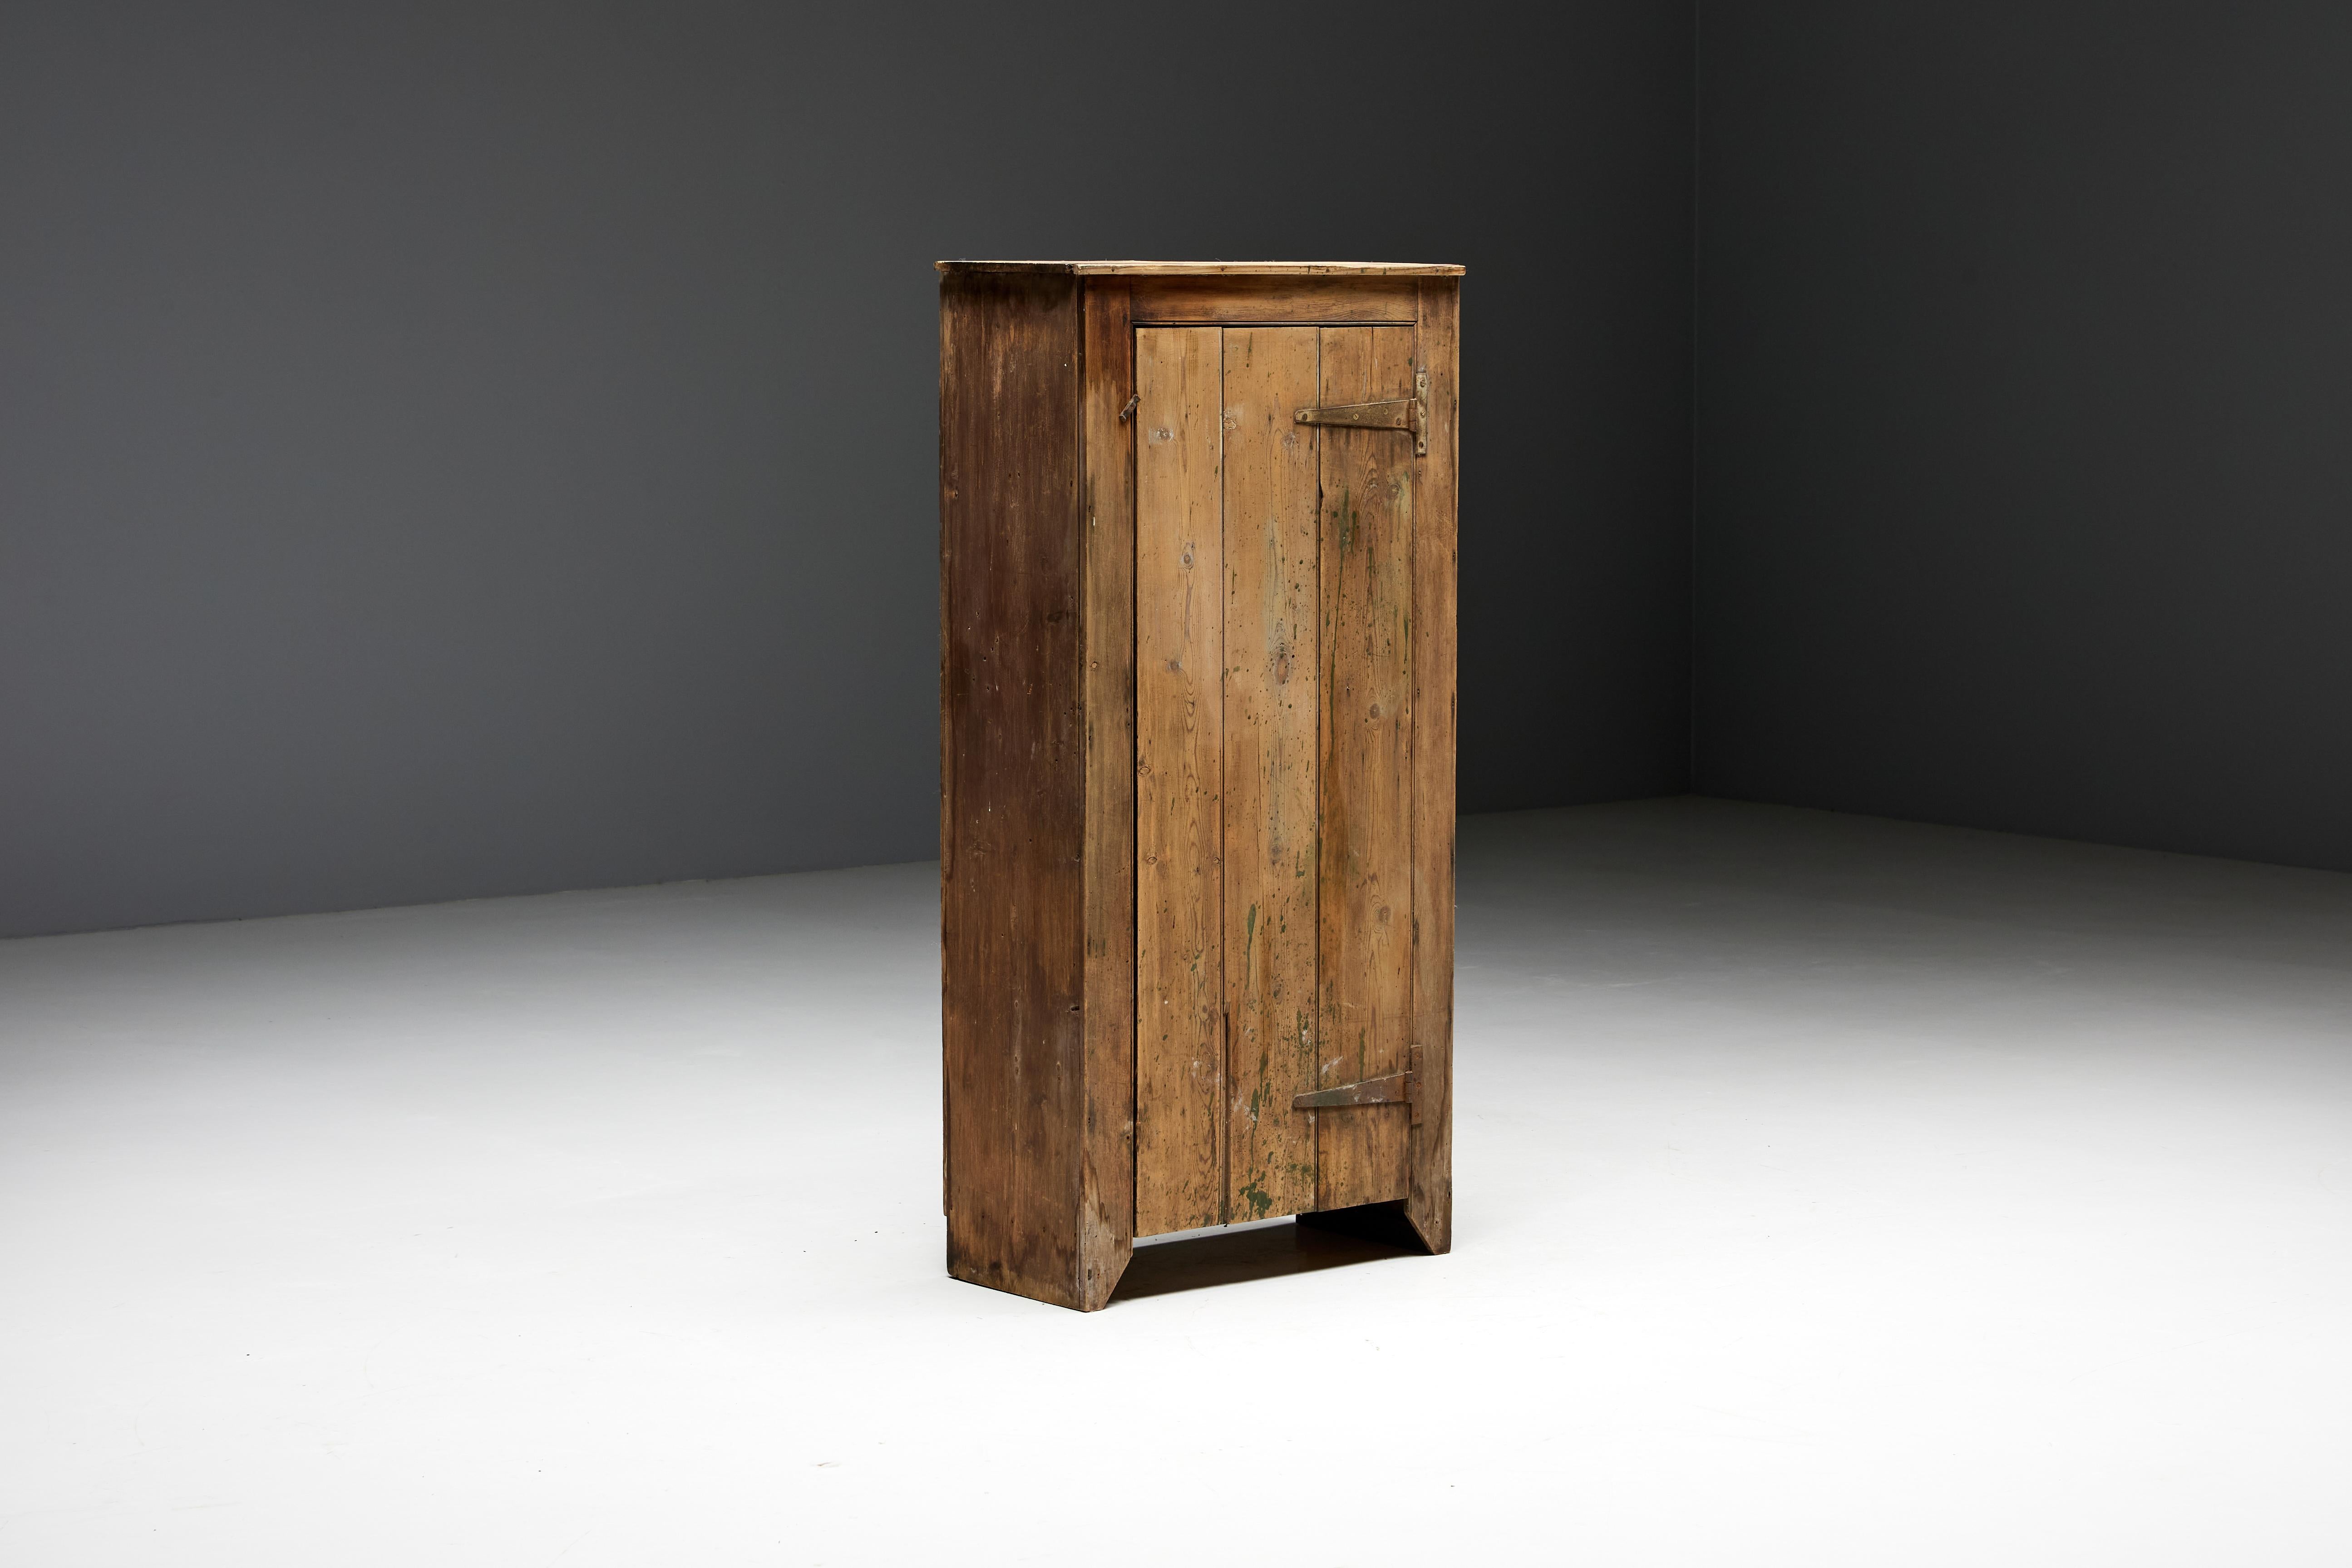 Art populaire cabinet, a stunning example of skilled craftsmanship, embodying the rich heritage and timeless beauty of the 19th-century period. Constructed from the finest wood, this cabinet showcases the unparalleled artistry of artisans who have